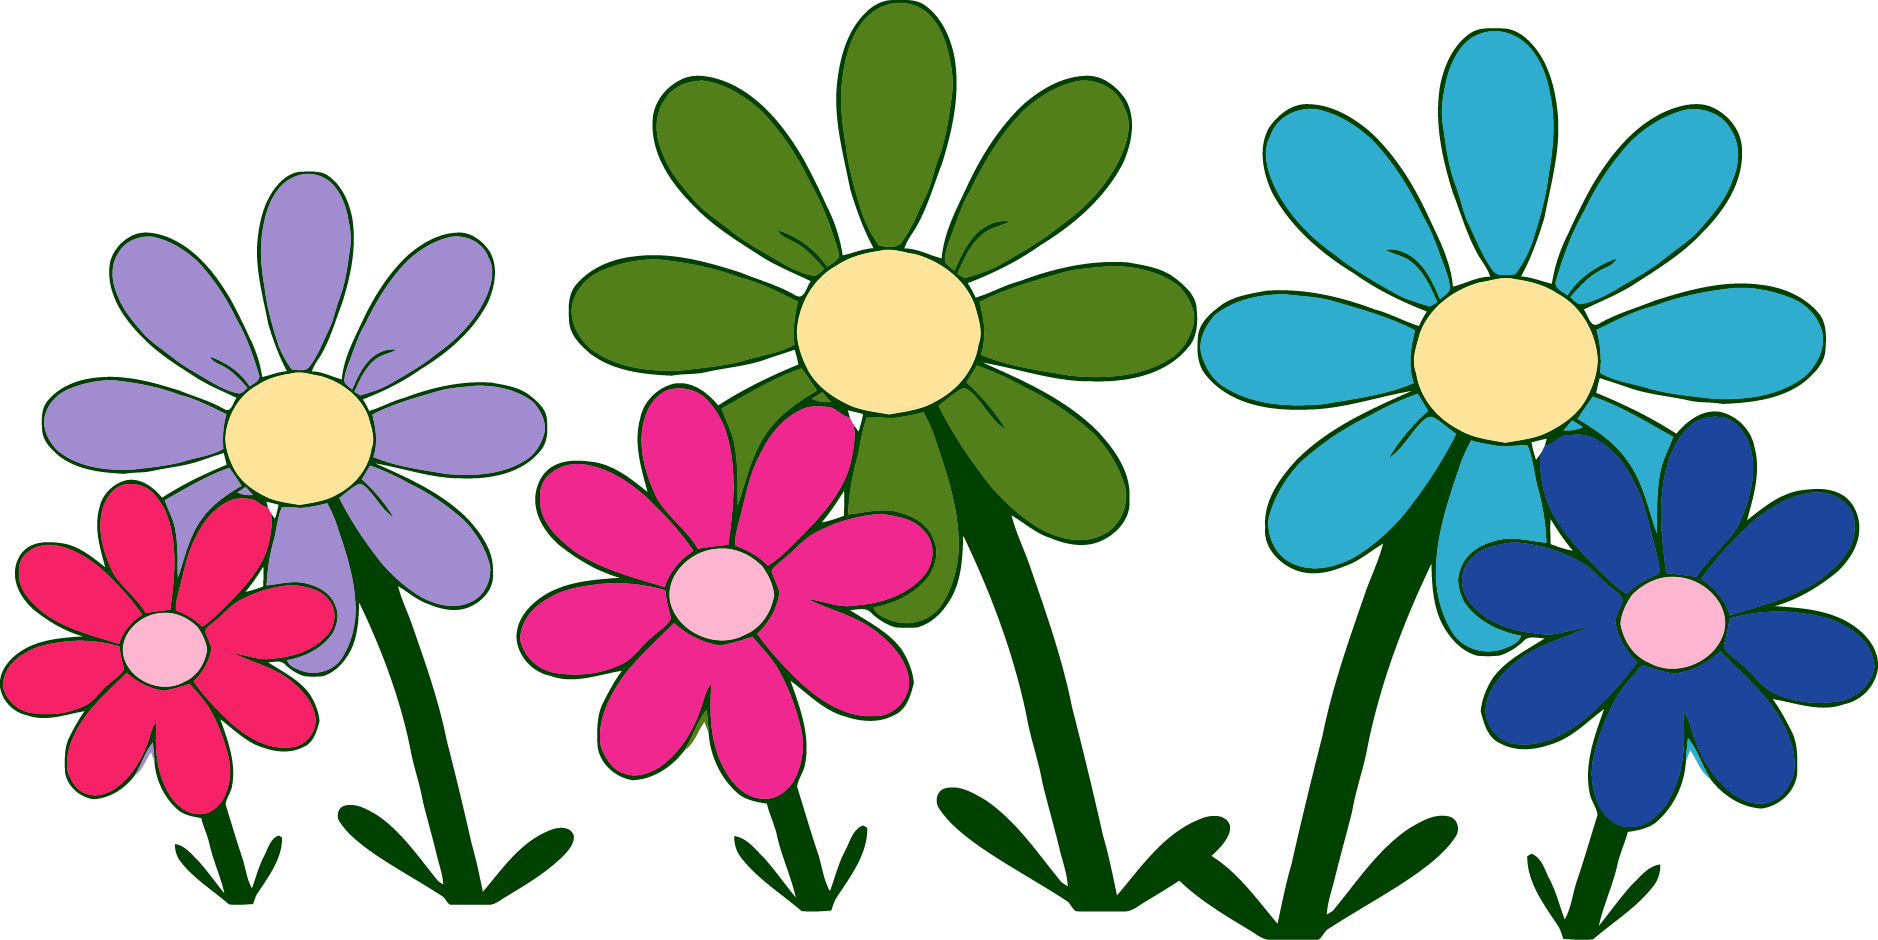 my-cute-graphics-free-flower-clip-art | Wallpaperal